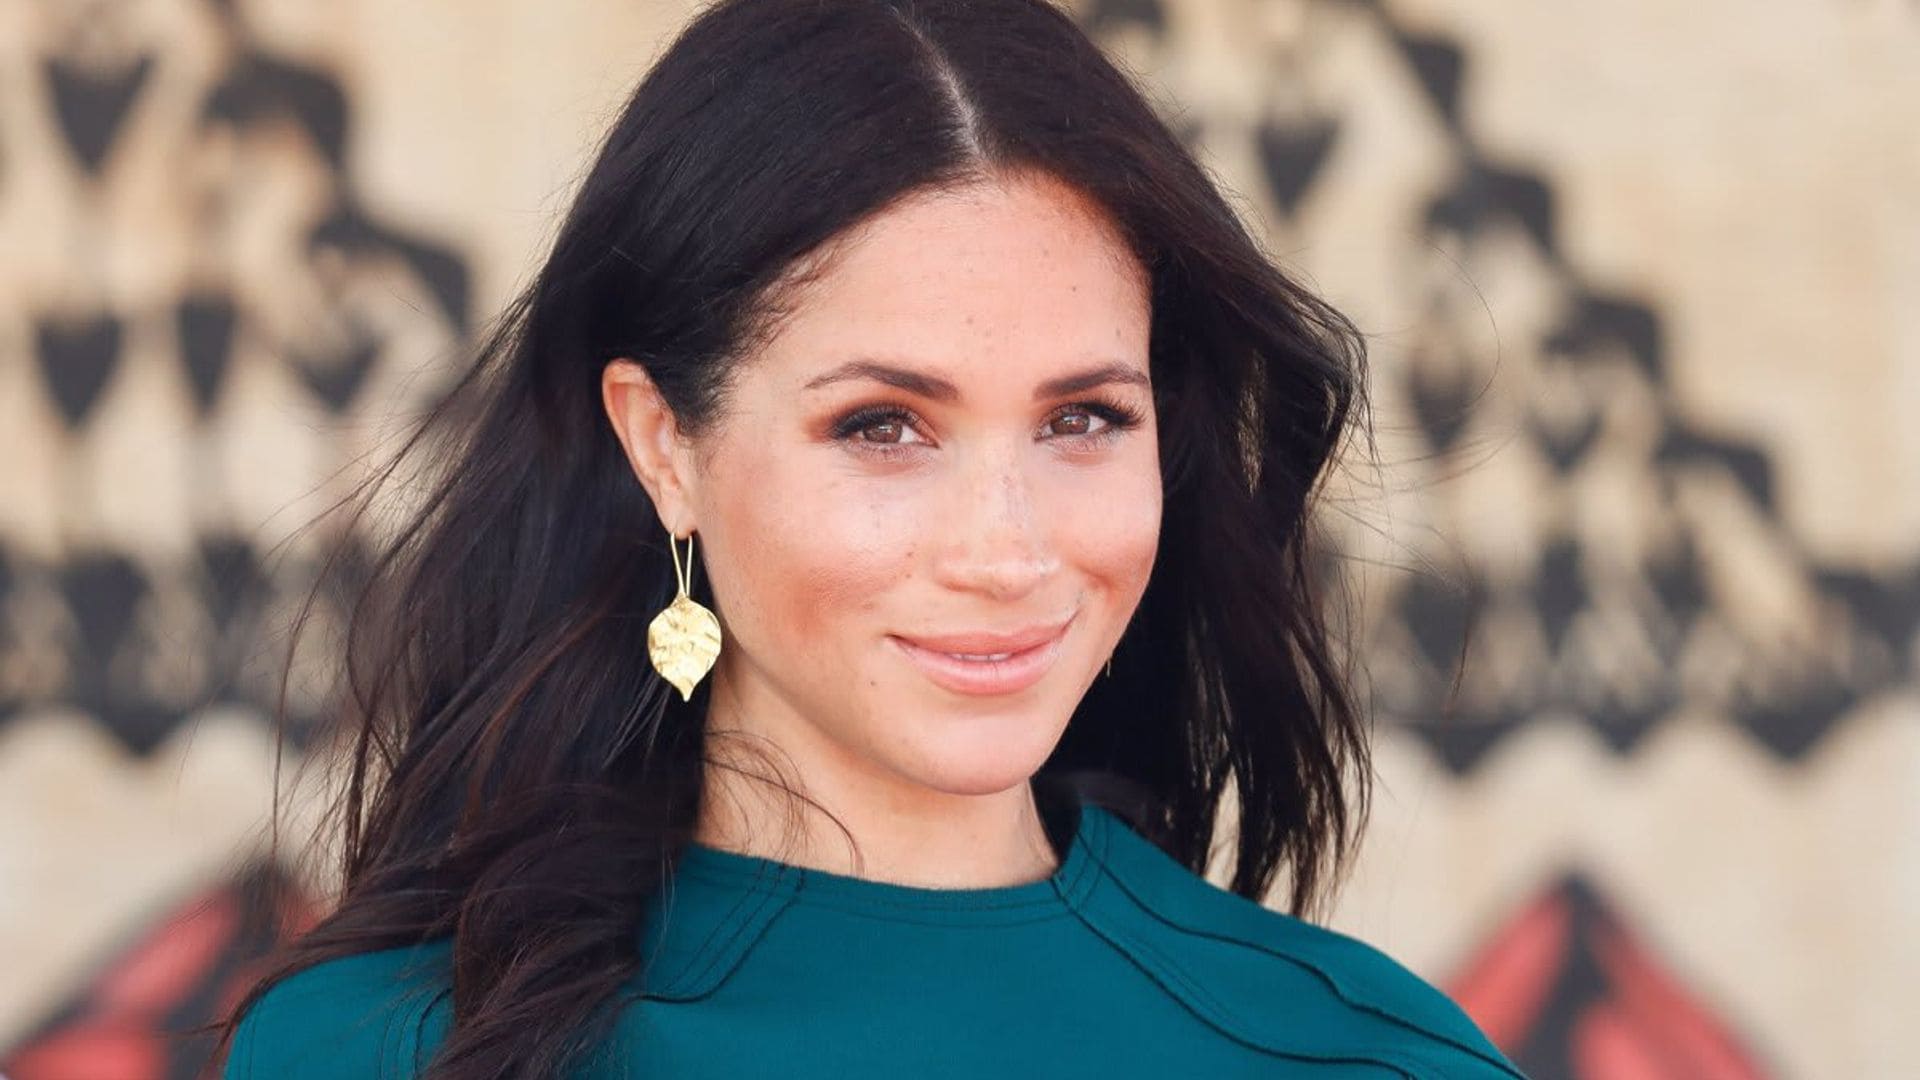 Meghan Markle says it's 'really liberating' to 'speak for yourself'